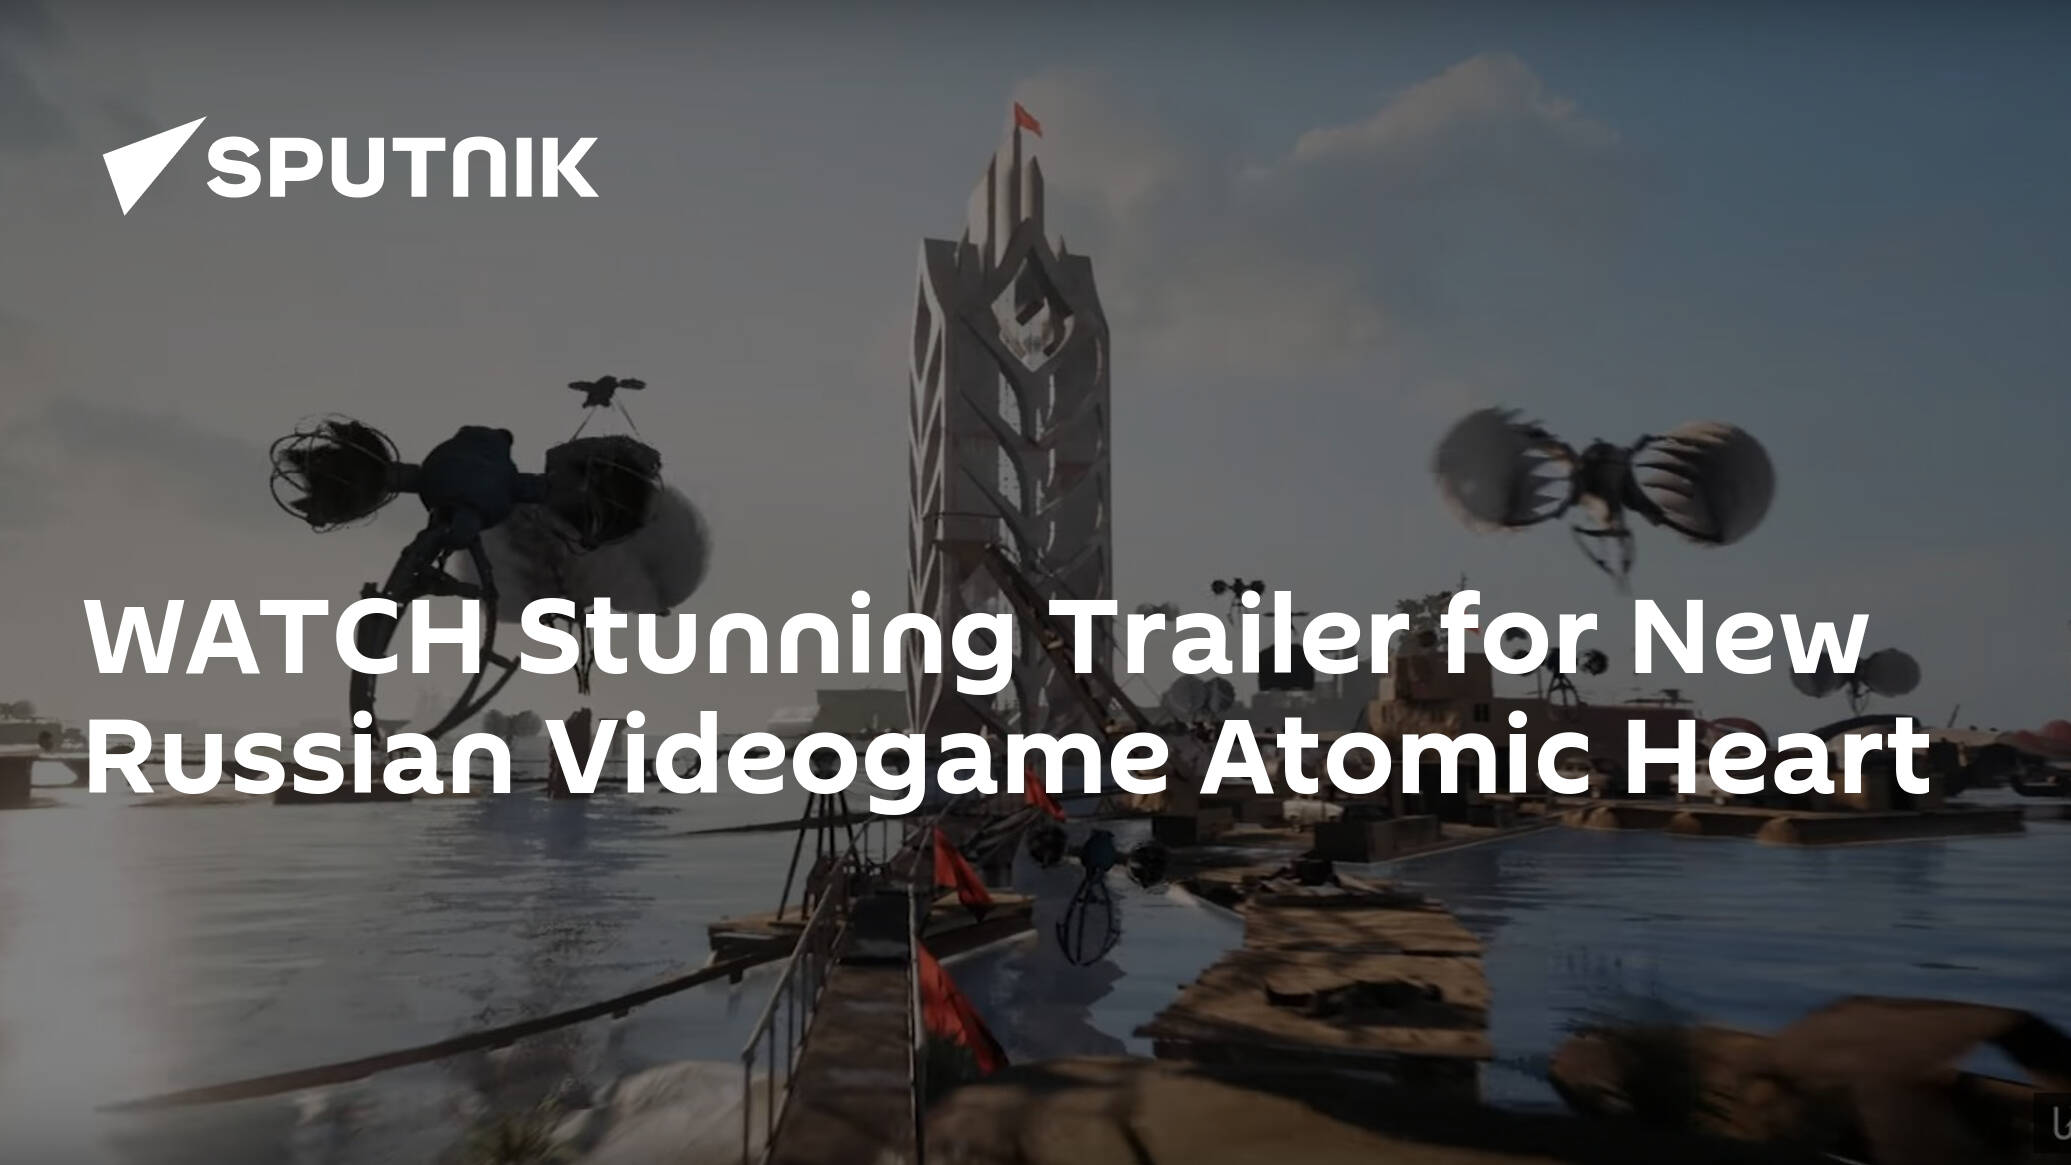 Embrace The Strange In Mother Russia With Atomic Heart's New Trailer